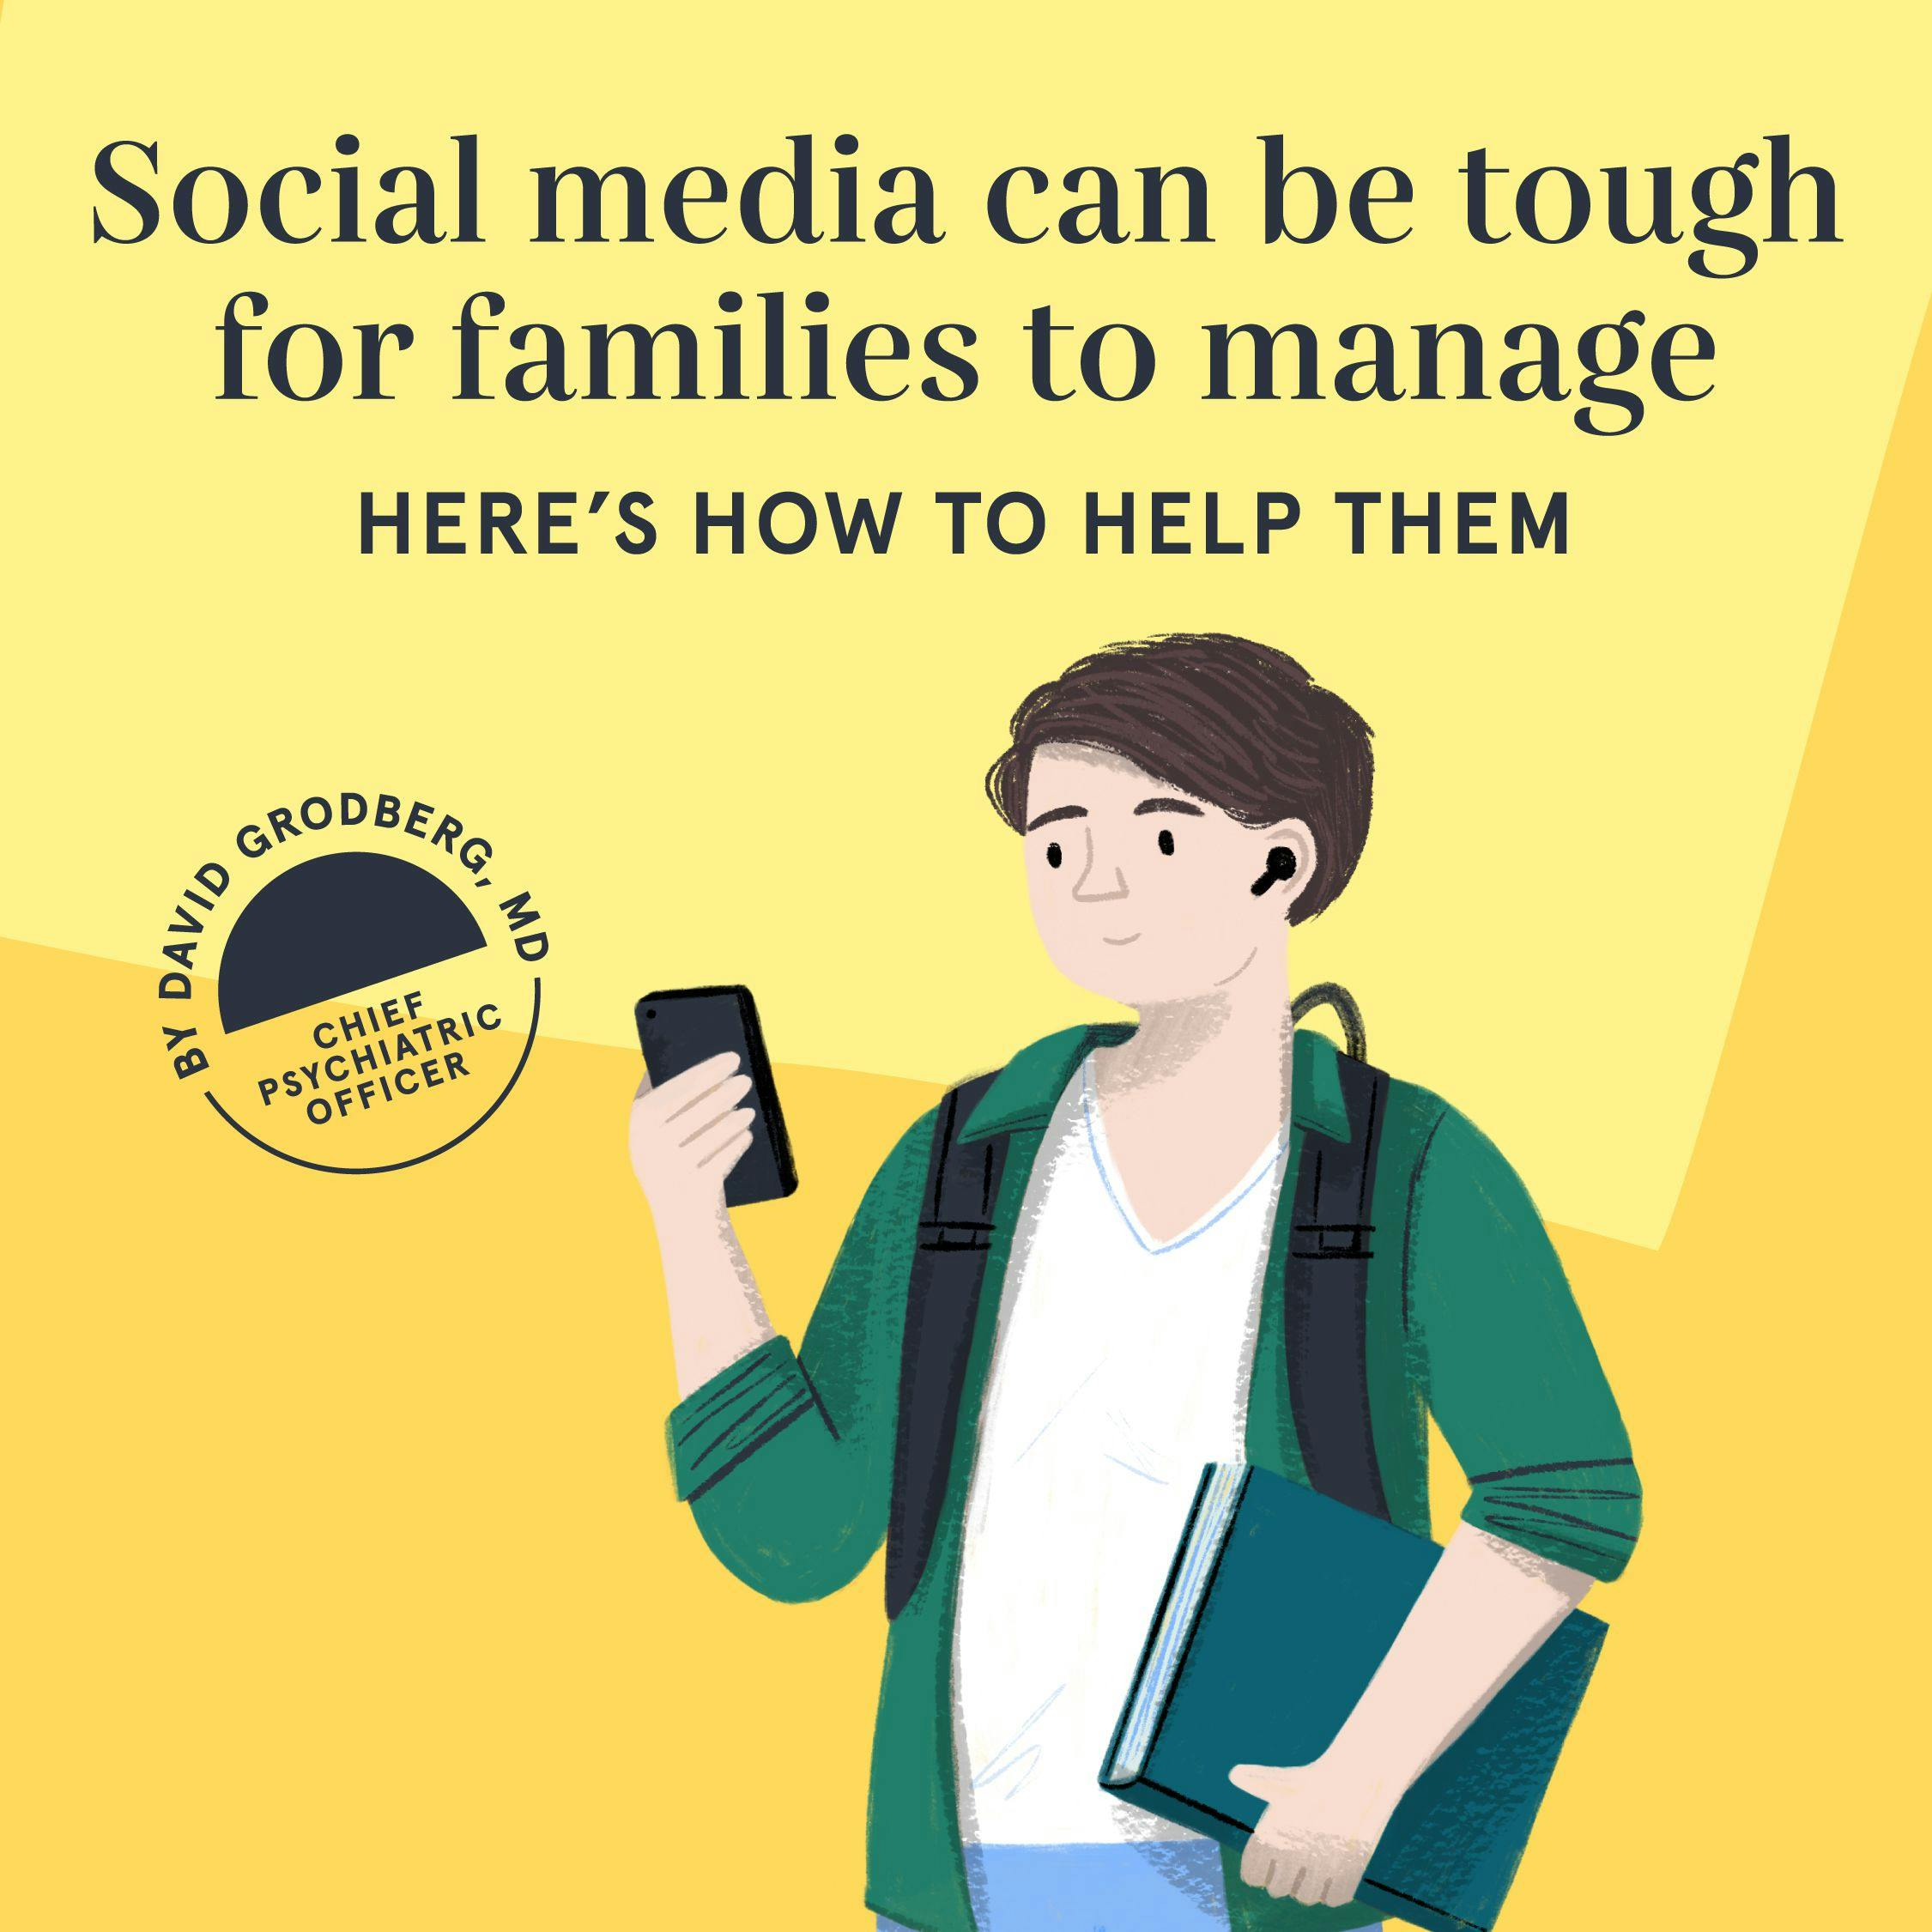 Social media can be tough for families to manage. Here’s how to help them